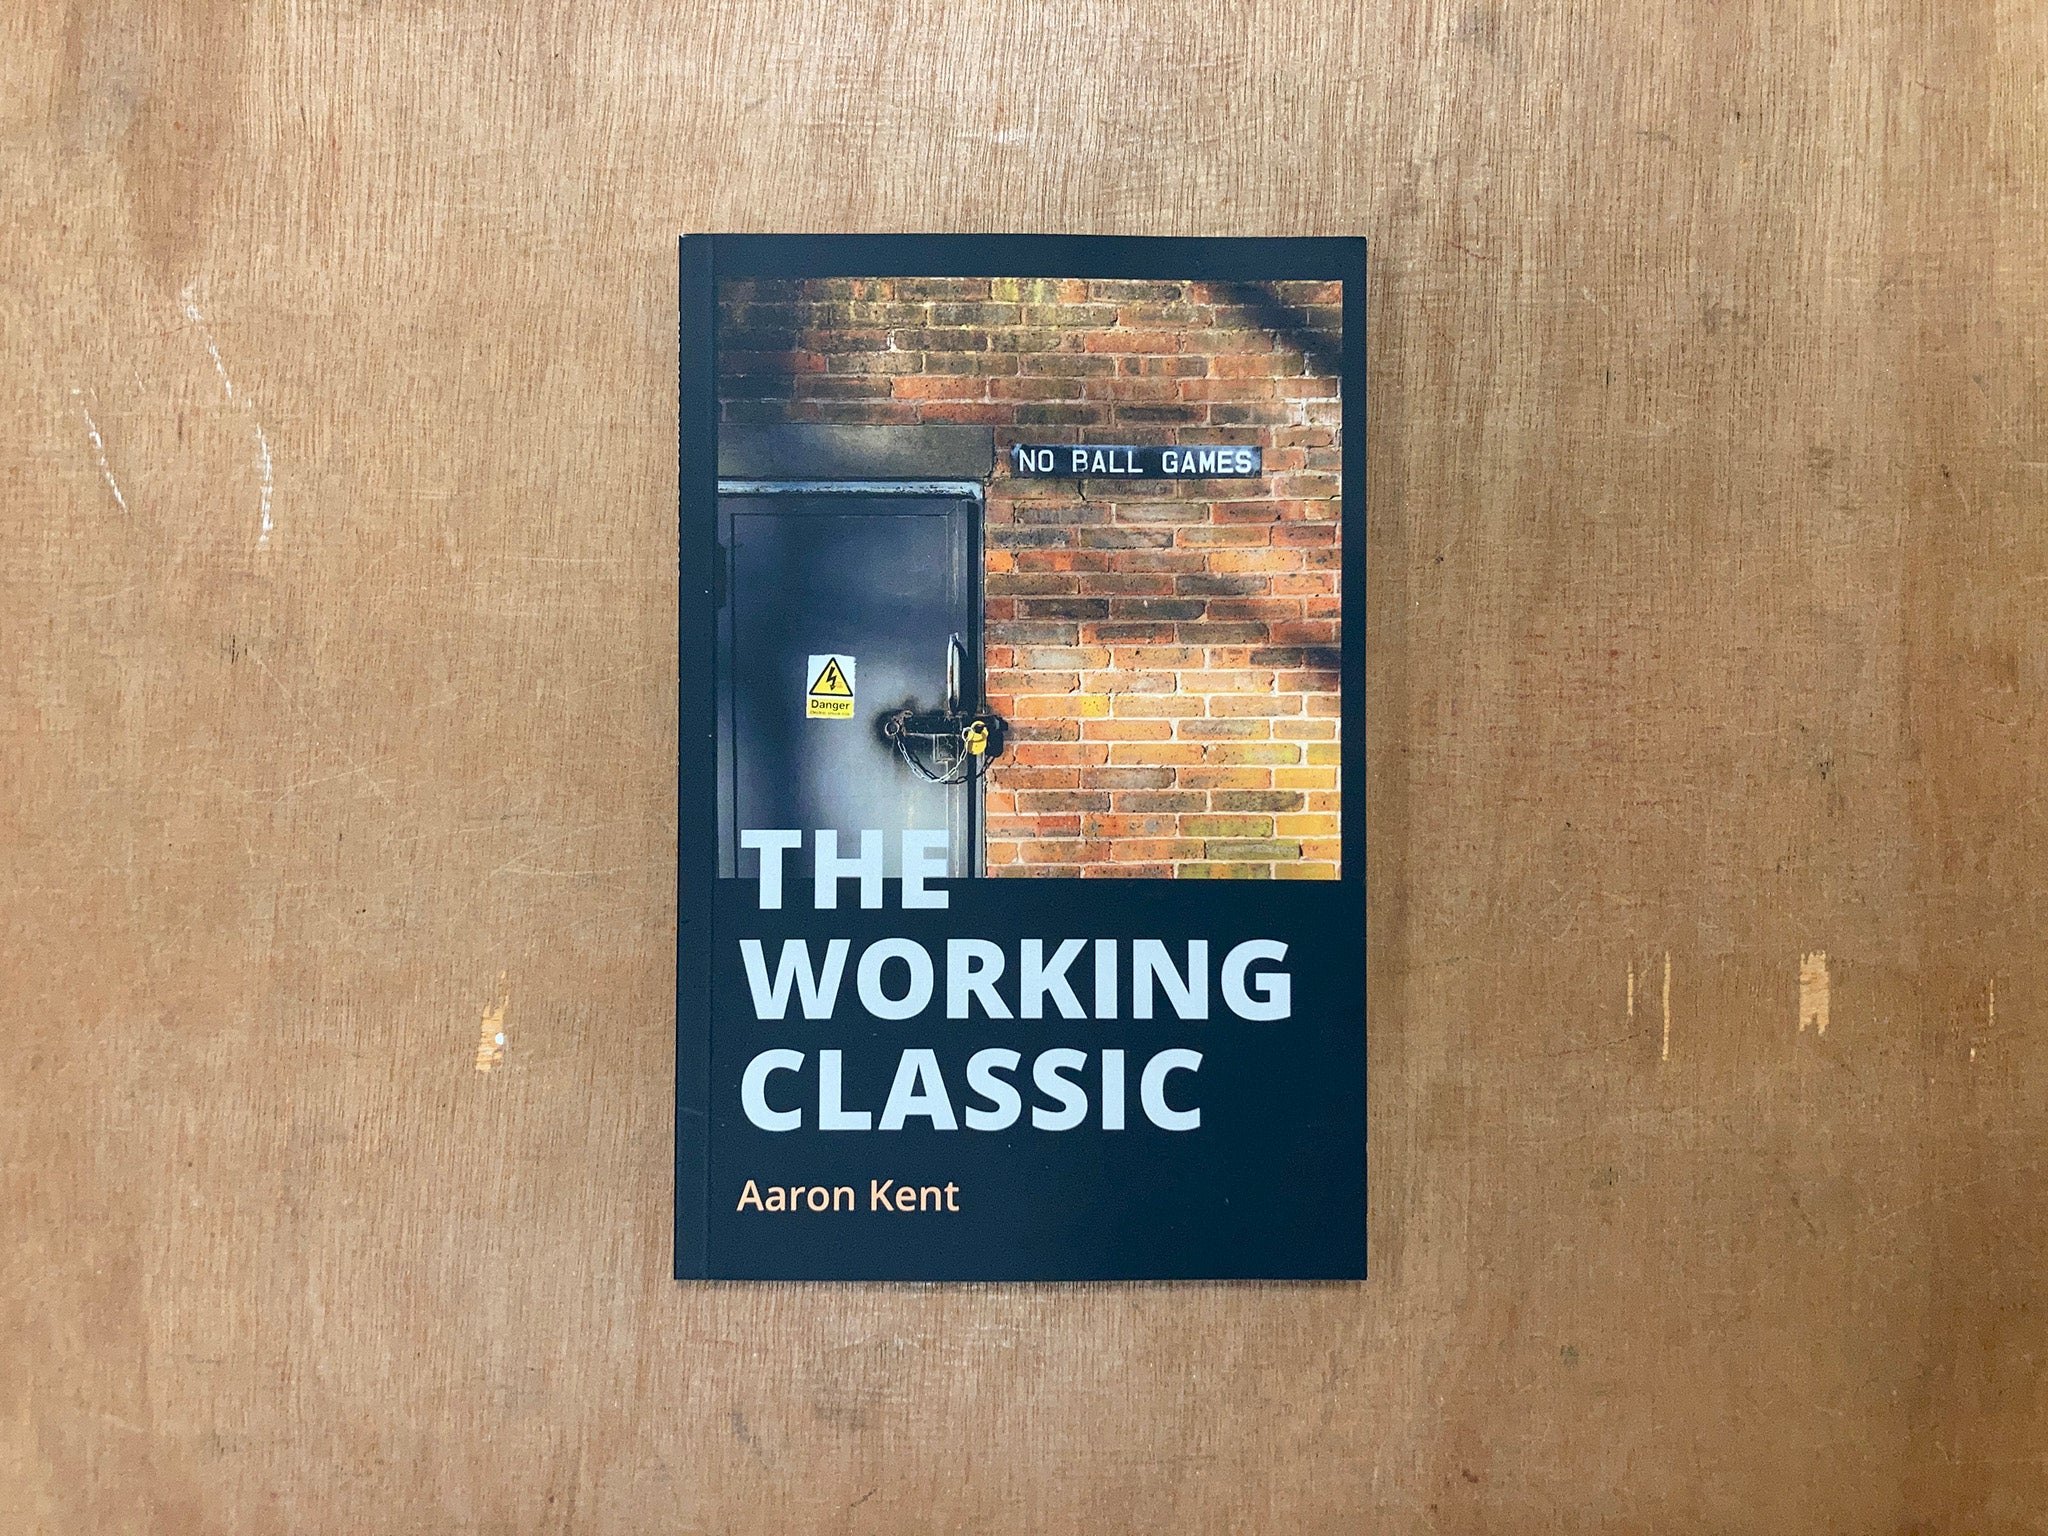 THE WORKING CLASSIC by Aaron Kent